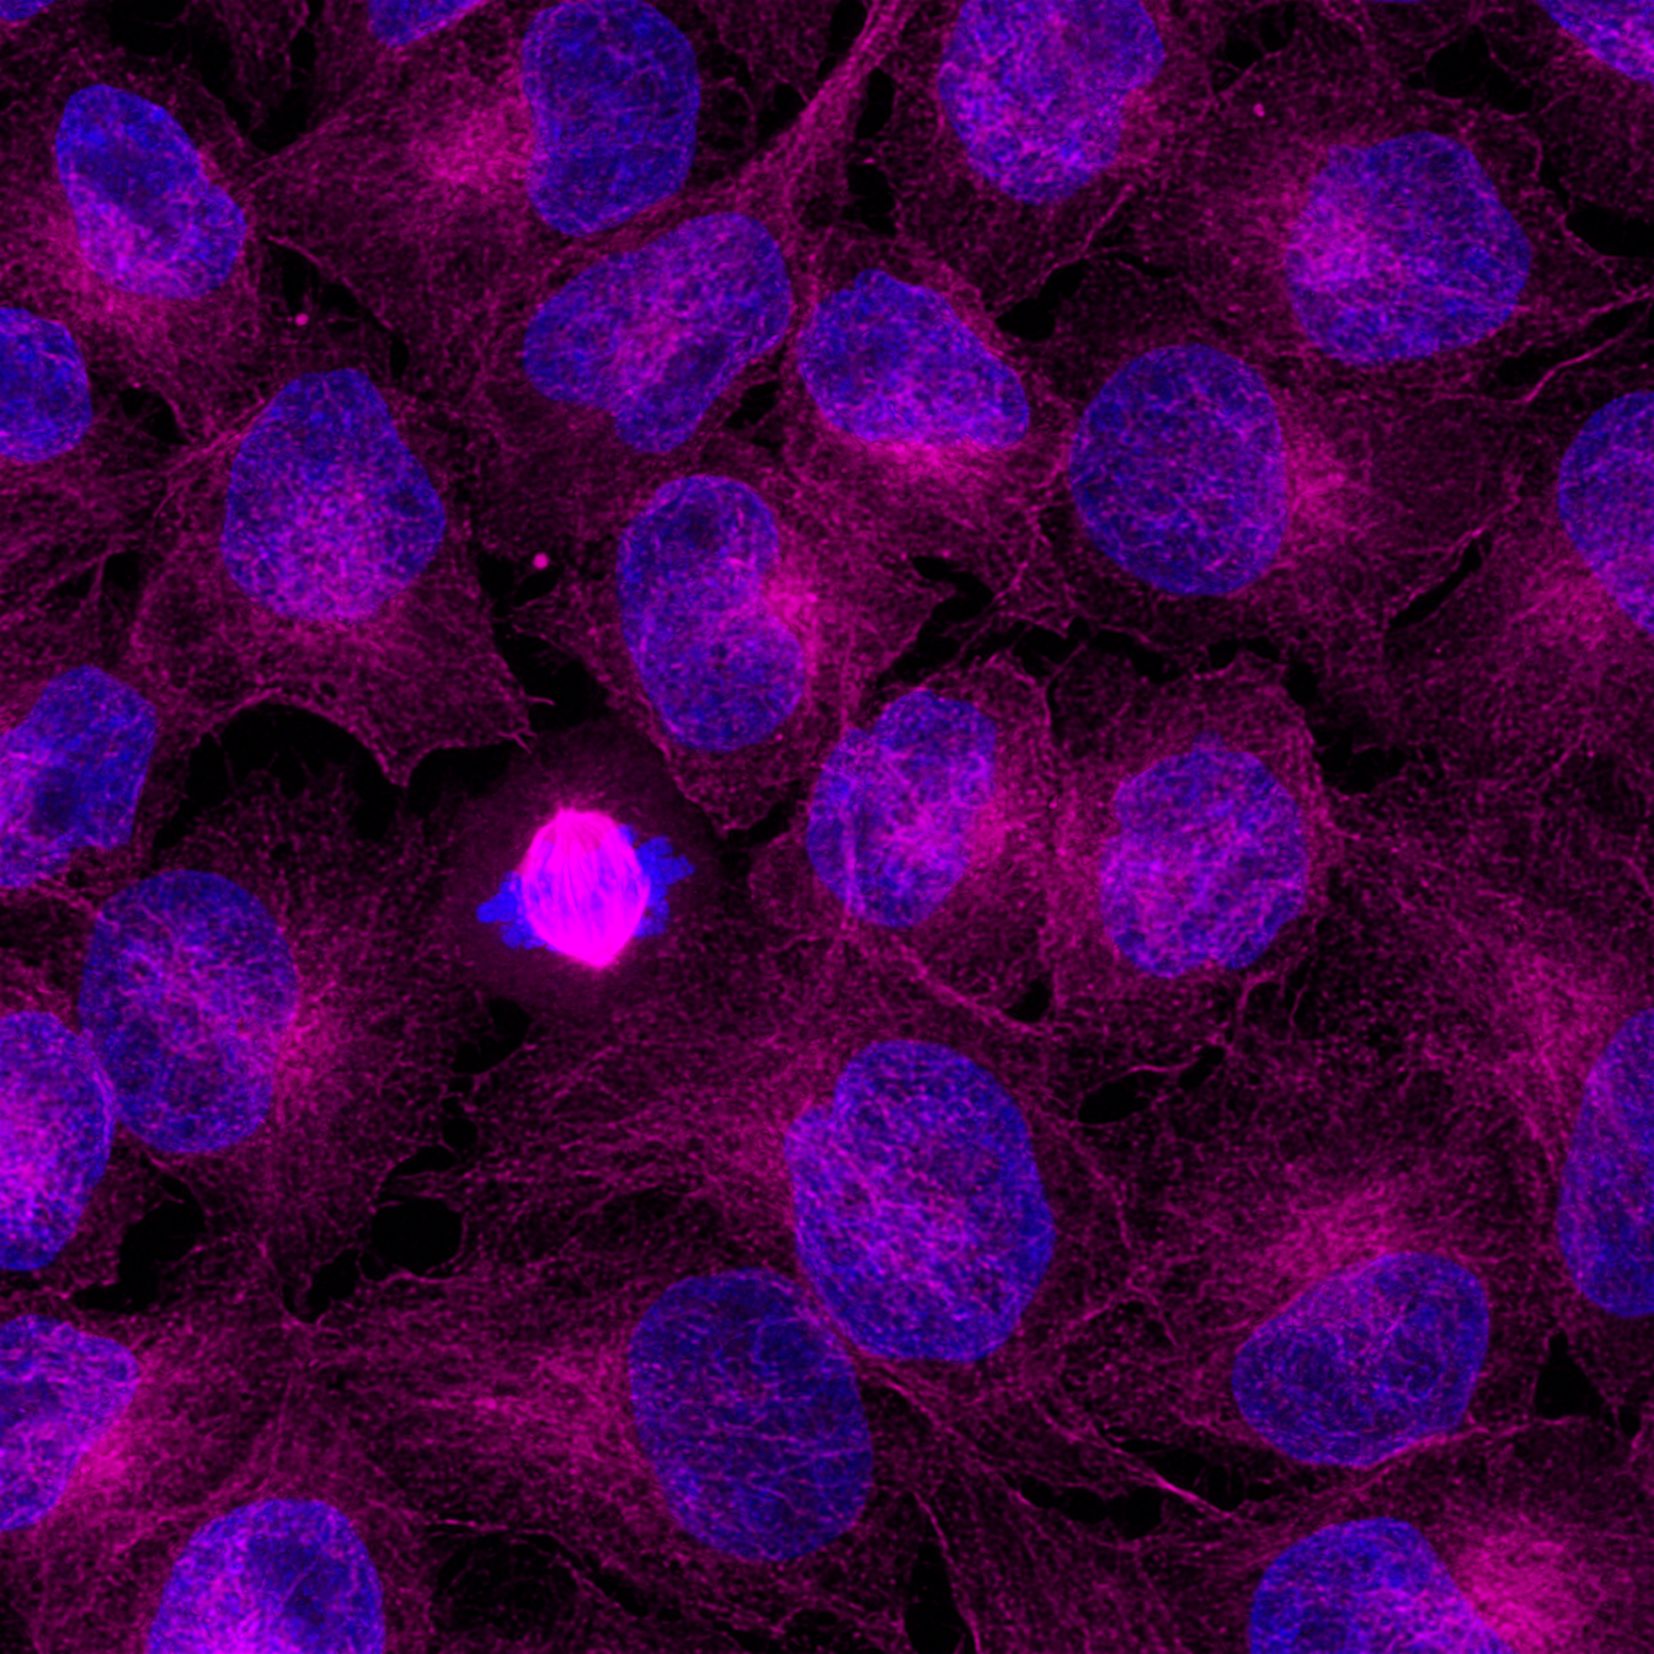 Immunofluorescence analysis of Hela cells stained with mouse IgG2a anti-Tubulin antibody (66240-1-Ig) and Nano-Secondary® alpaca anti-mouse IgG2a, recombinant VHH, CoraLite® Plus 647 (magenta). Nuclei were stained with DAPI (blue). Images were recorded at the Core Facility Bioimaging at the Biomedical Center, LMU Munich.